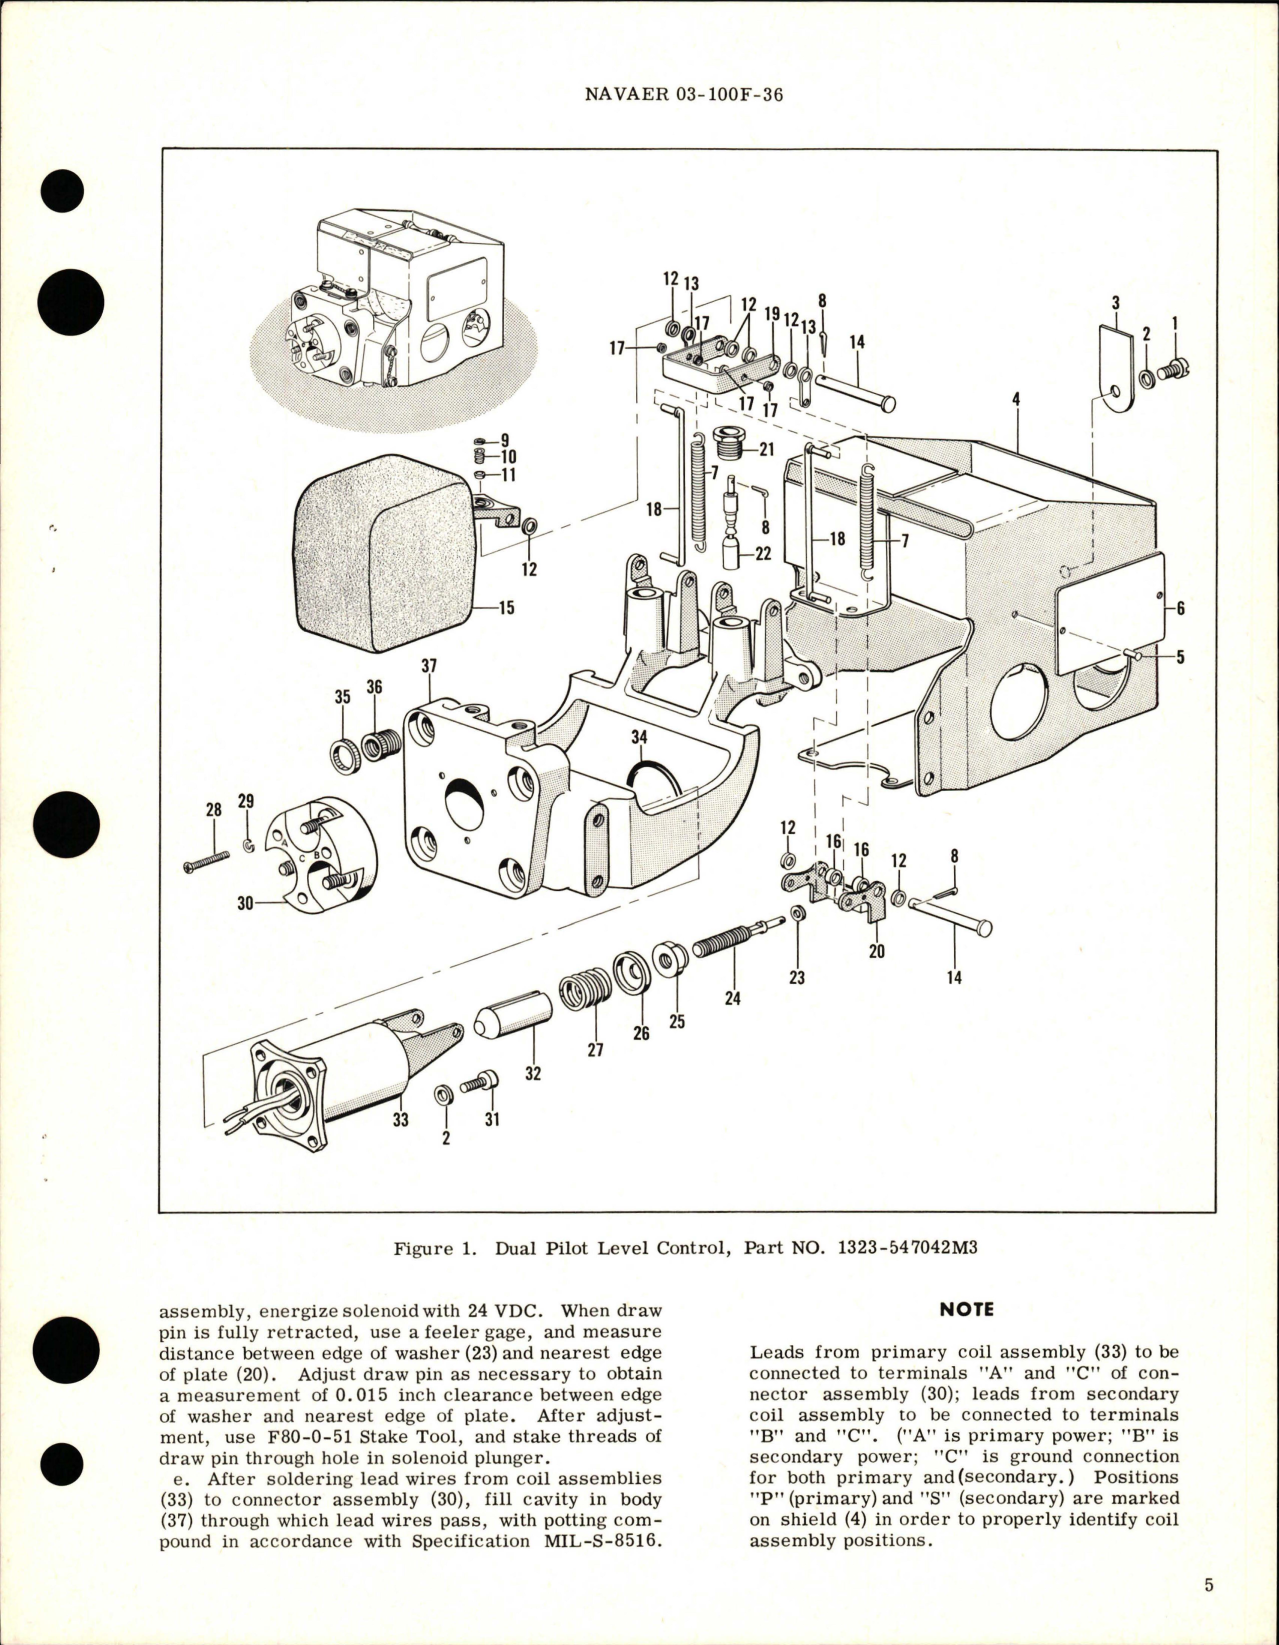 Sample page 5 from AirCorps Library document: Overhaul Instructions with Parts Breakdown for Duel Pilot Level Control Valve - Part 1323-547042M3